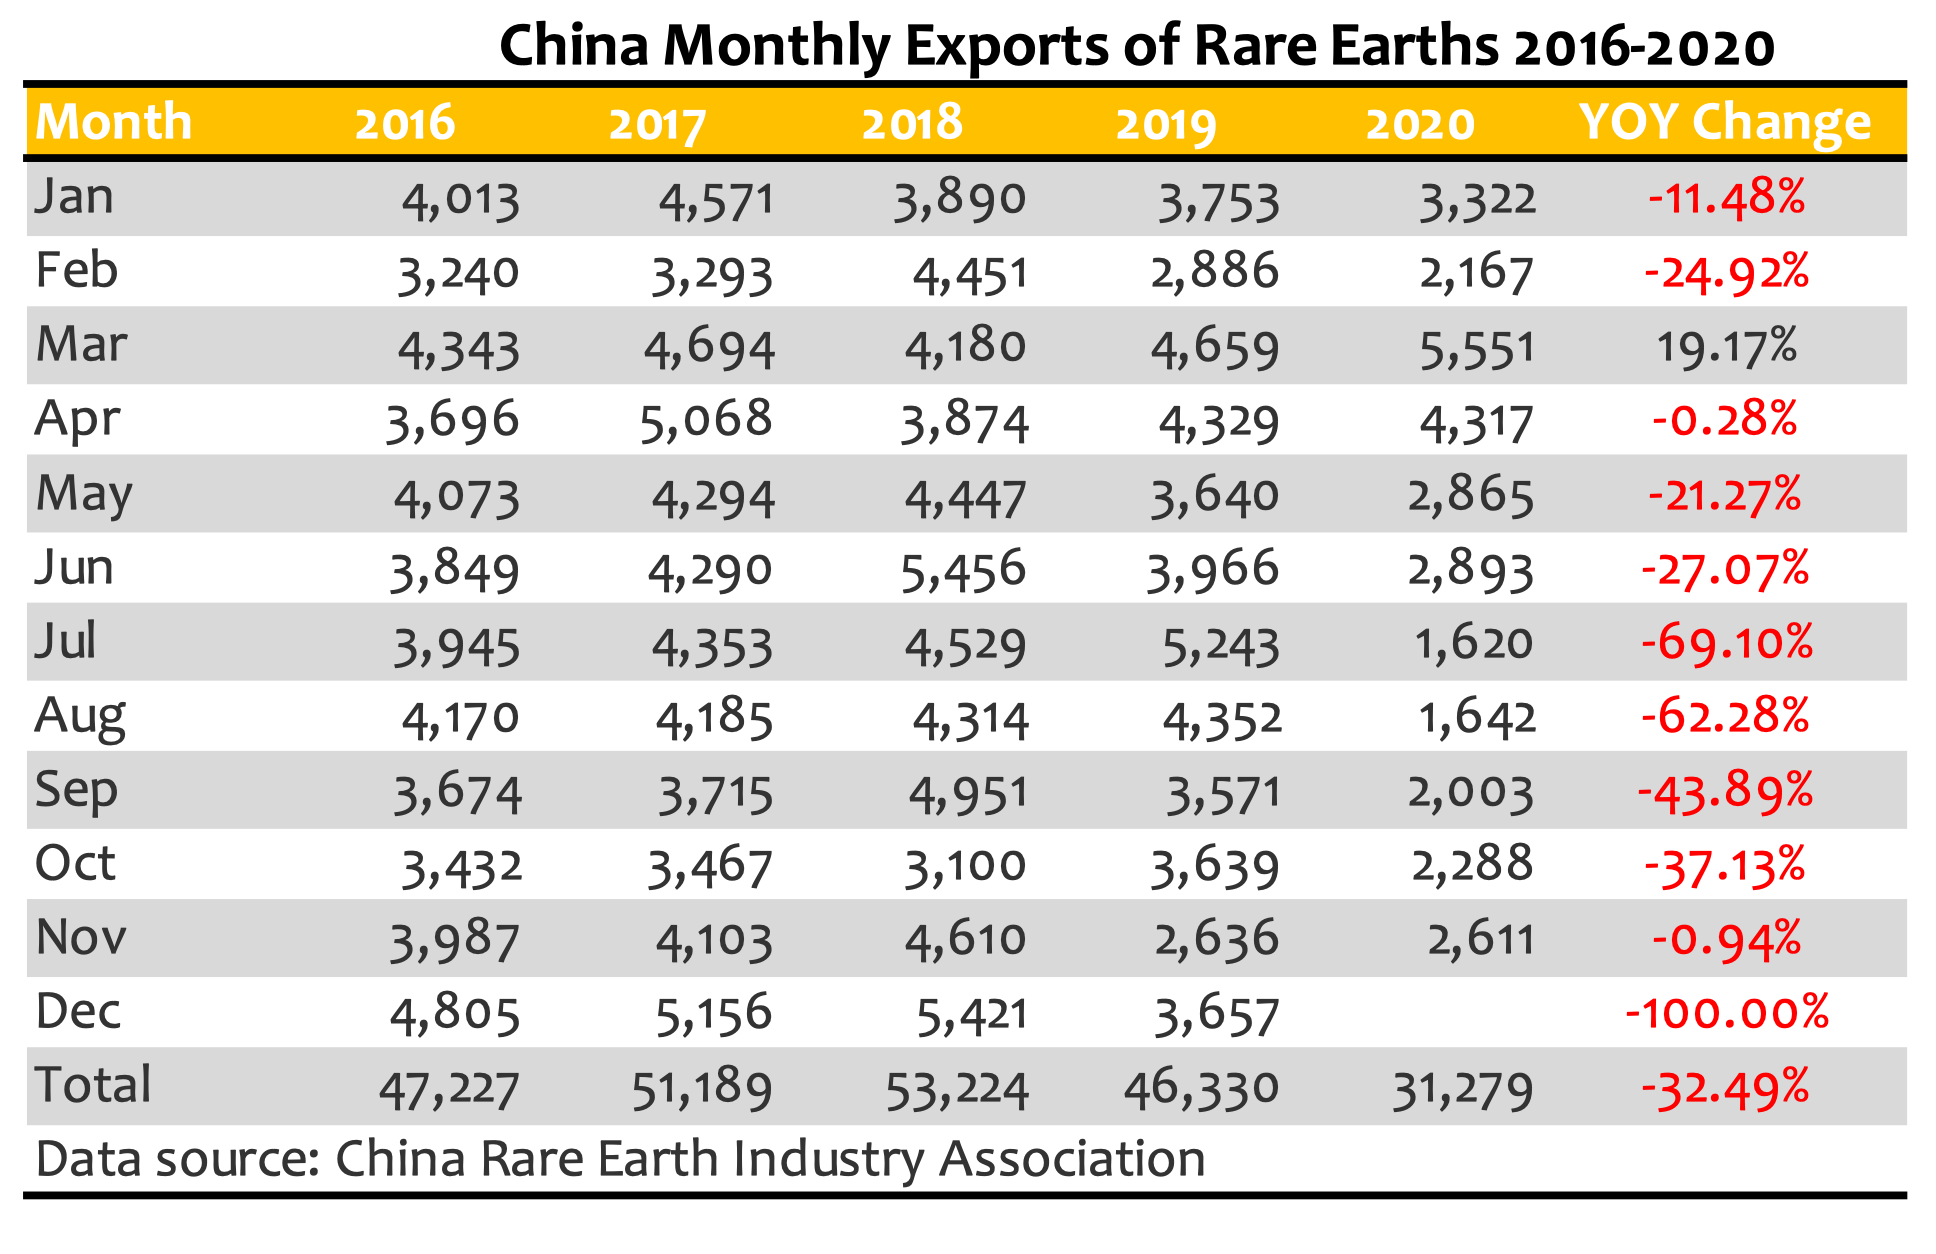 China Monthly Rare Earth Exports